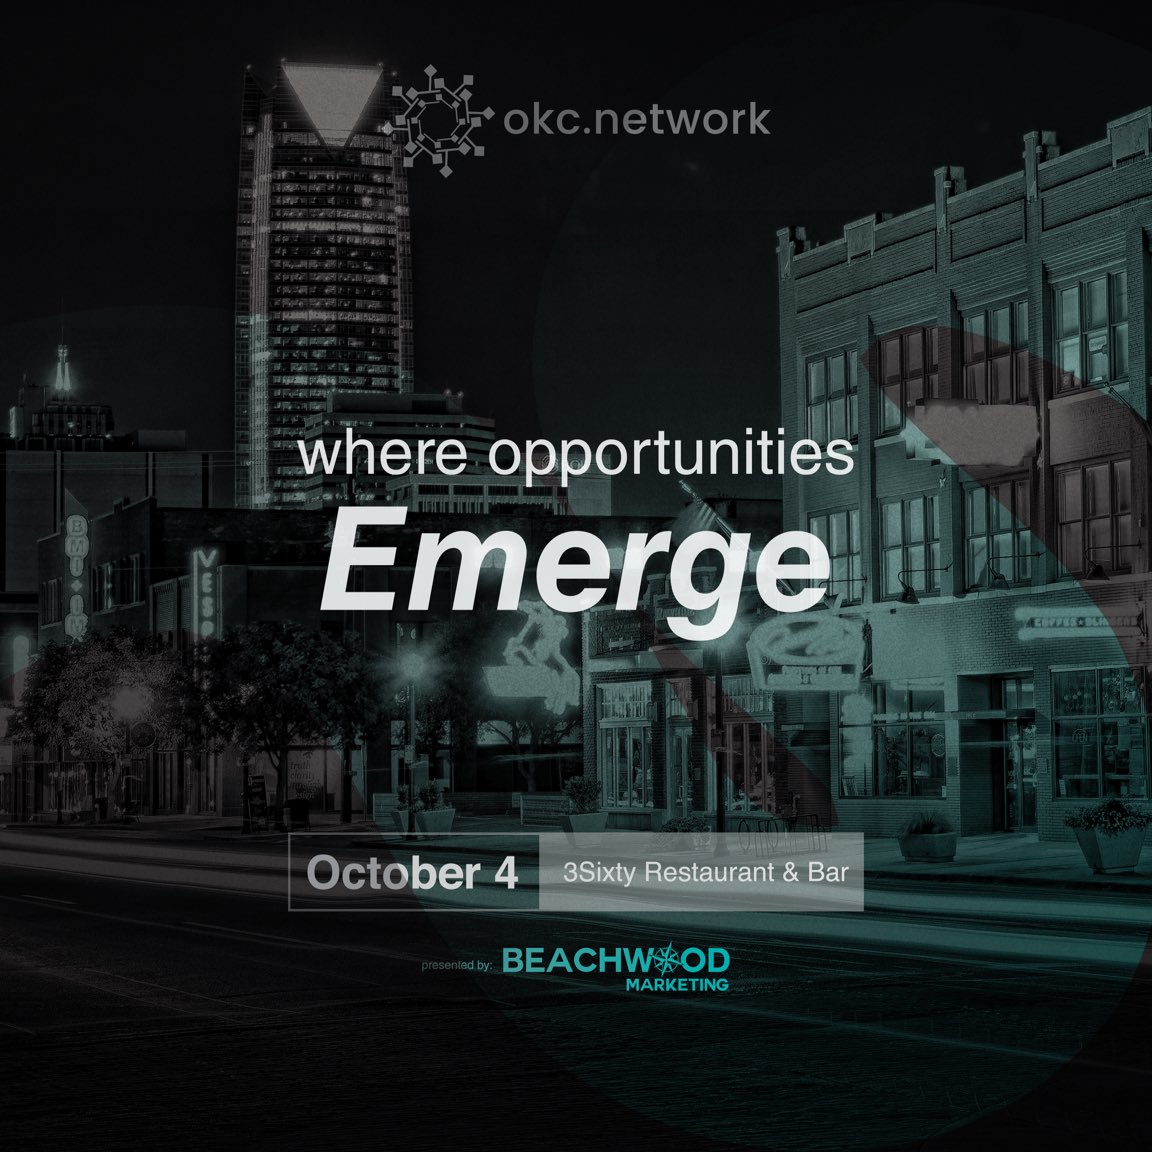 Join okc.network and industry leading professionals October 4. okc.network events are where opportunities emerge. Tickets on sale now, goo.gl/DxaAuG. — #okc #okcfoodie #oklahoma #oklahomacity #oklahoman #localokc #okcthunder #okcnetworking